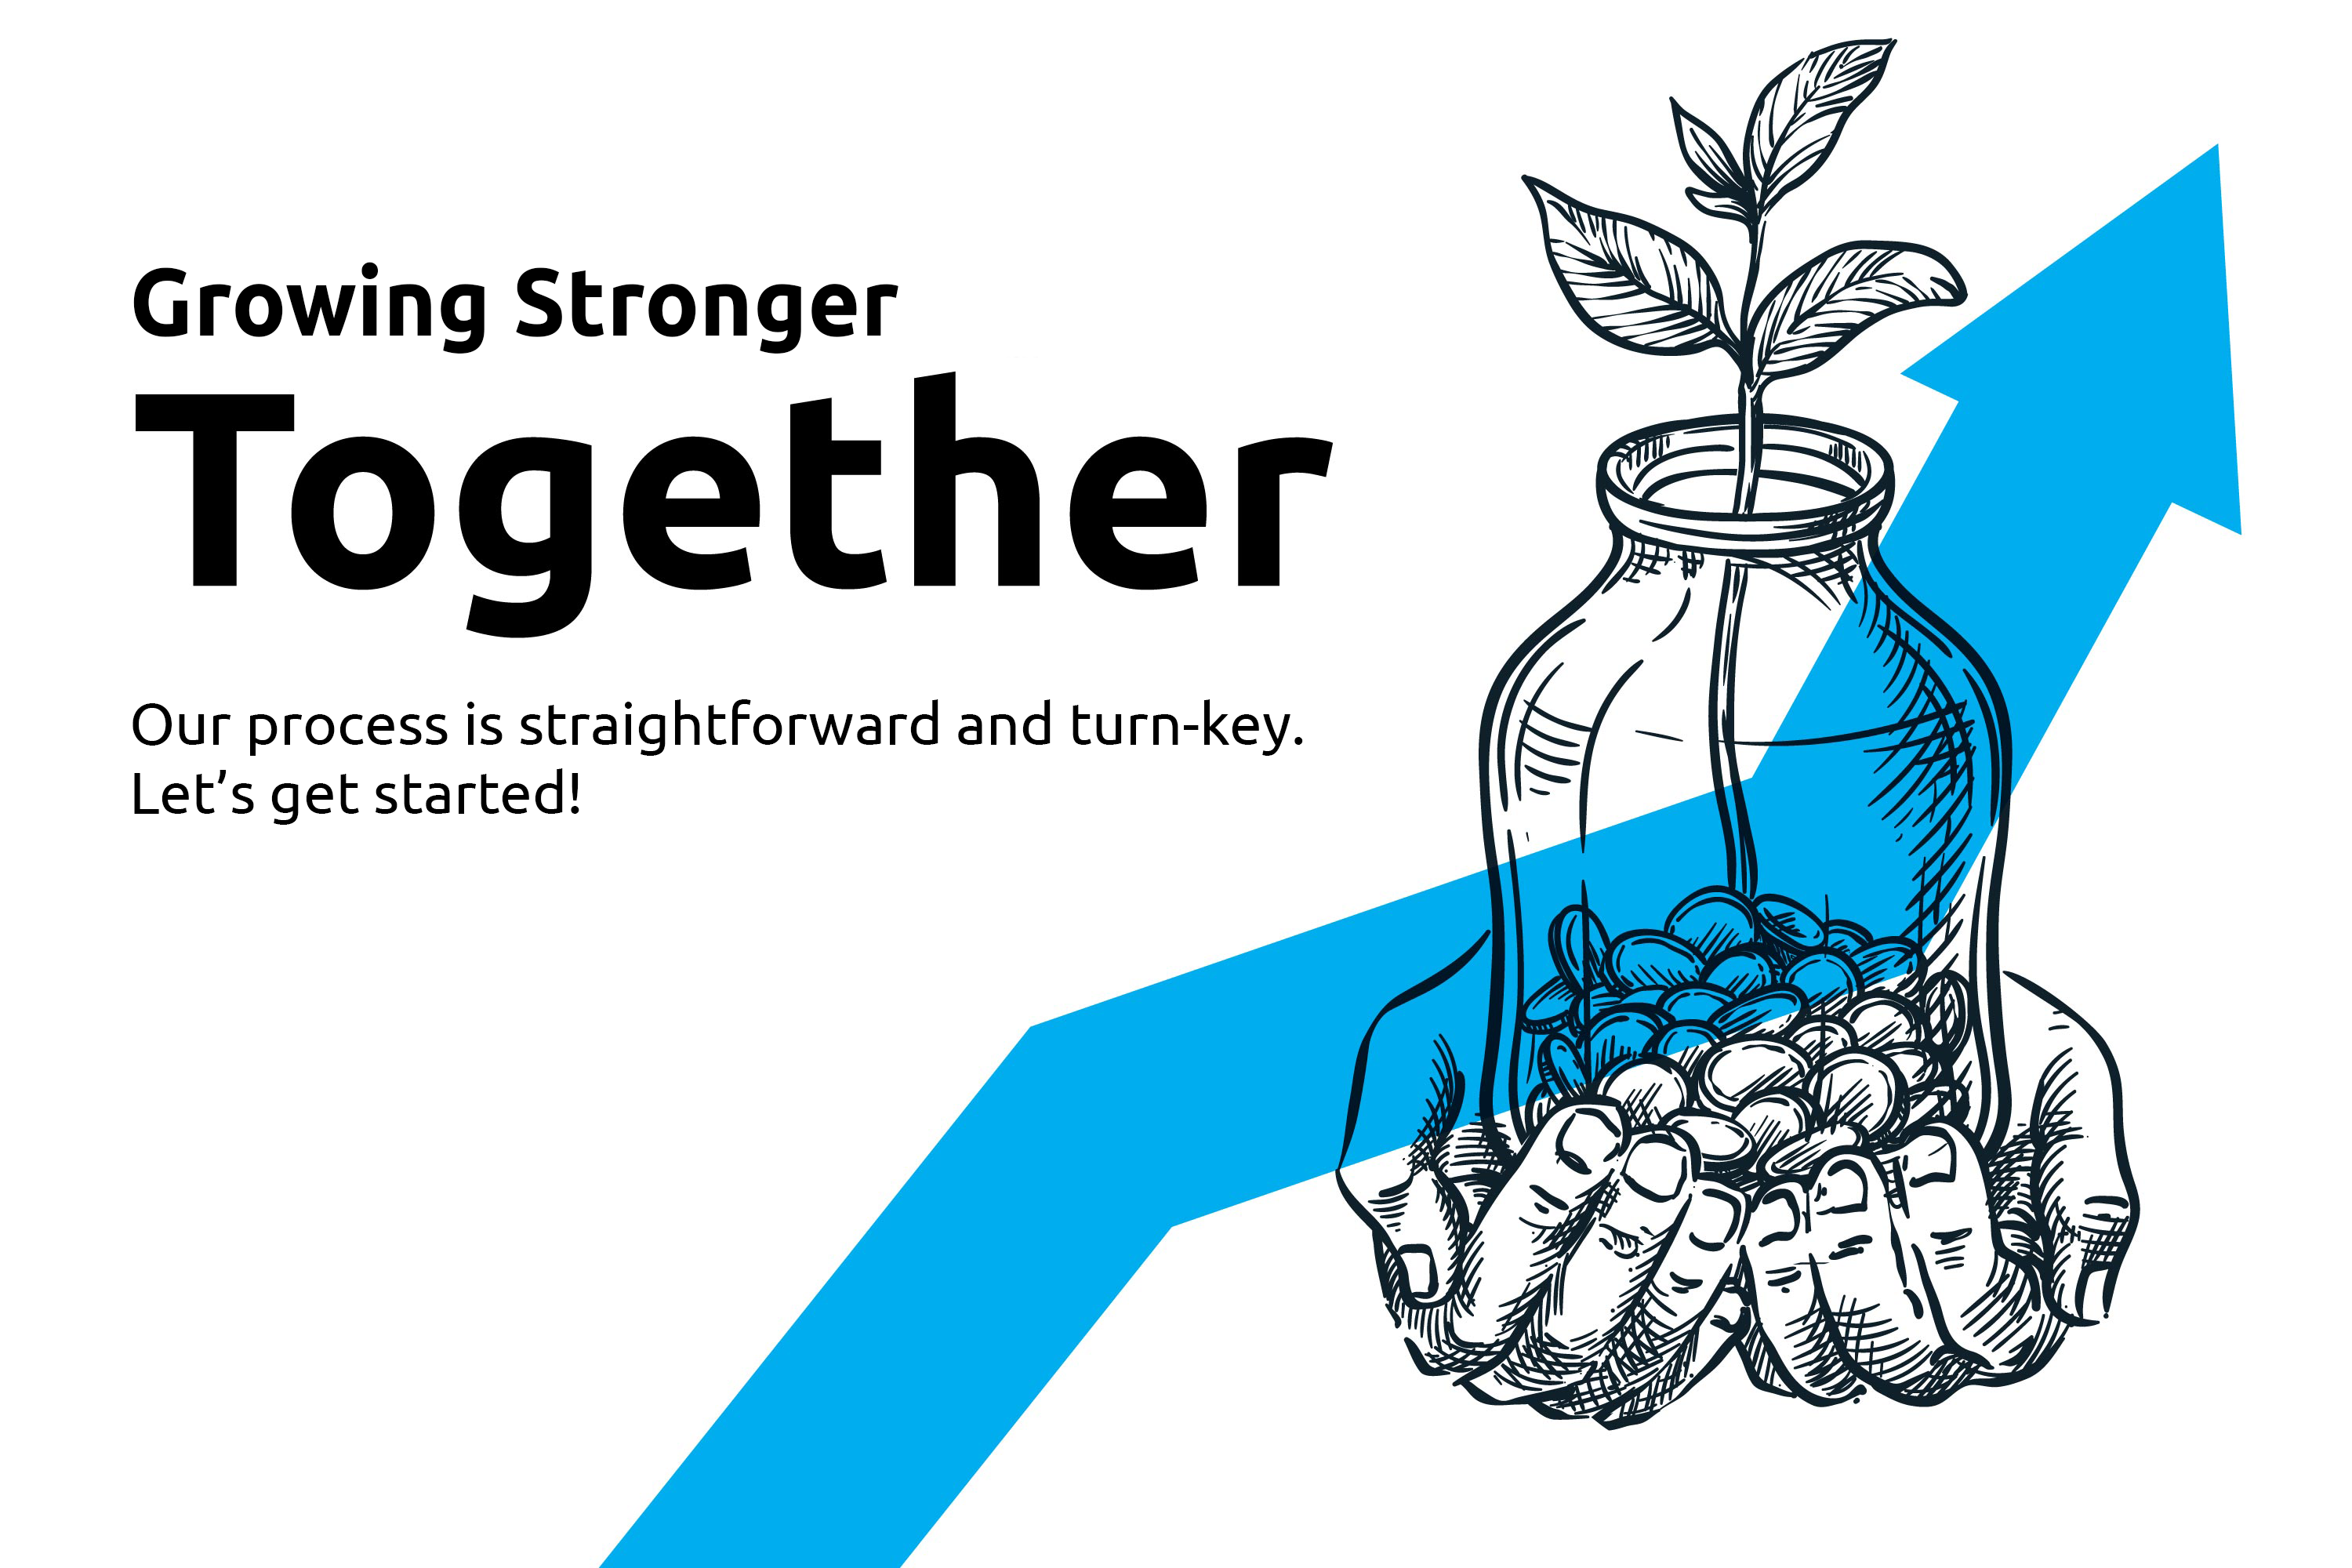 Growing stronger together. Our process is straightforwrad and turn-key. Lets get started.